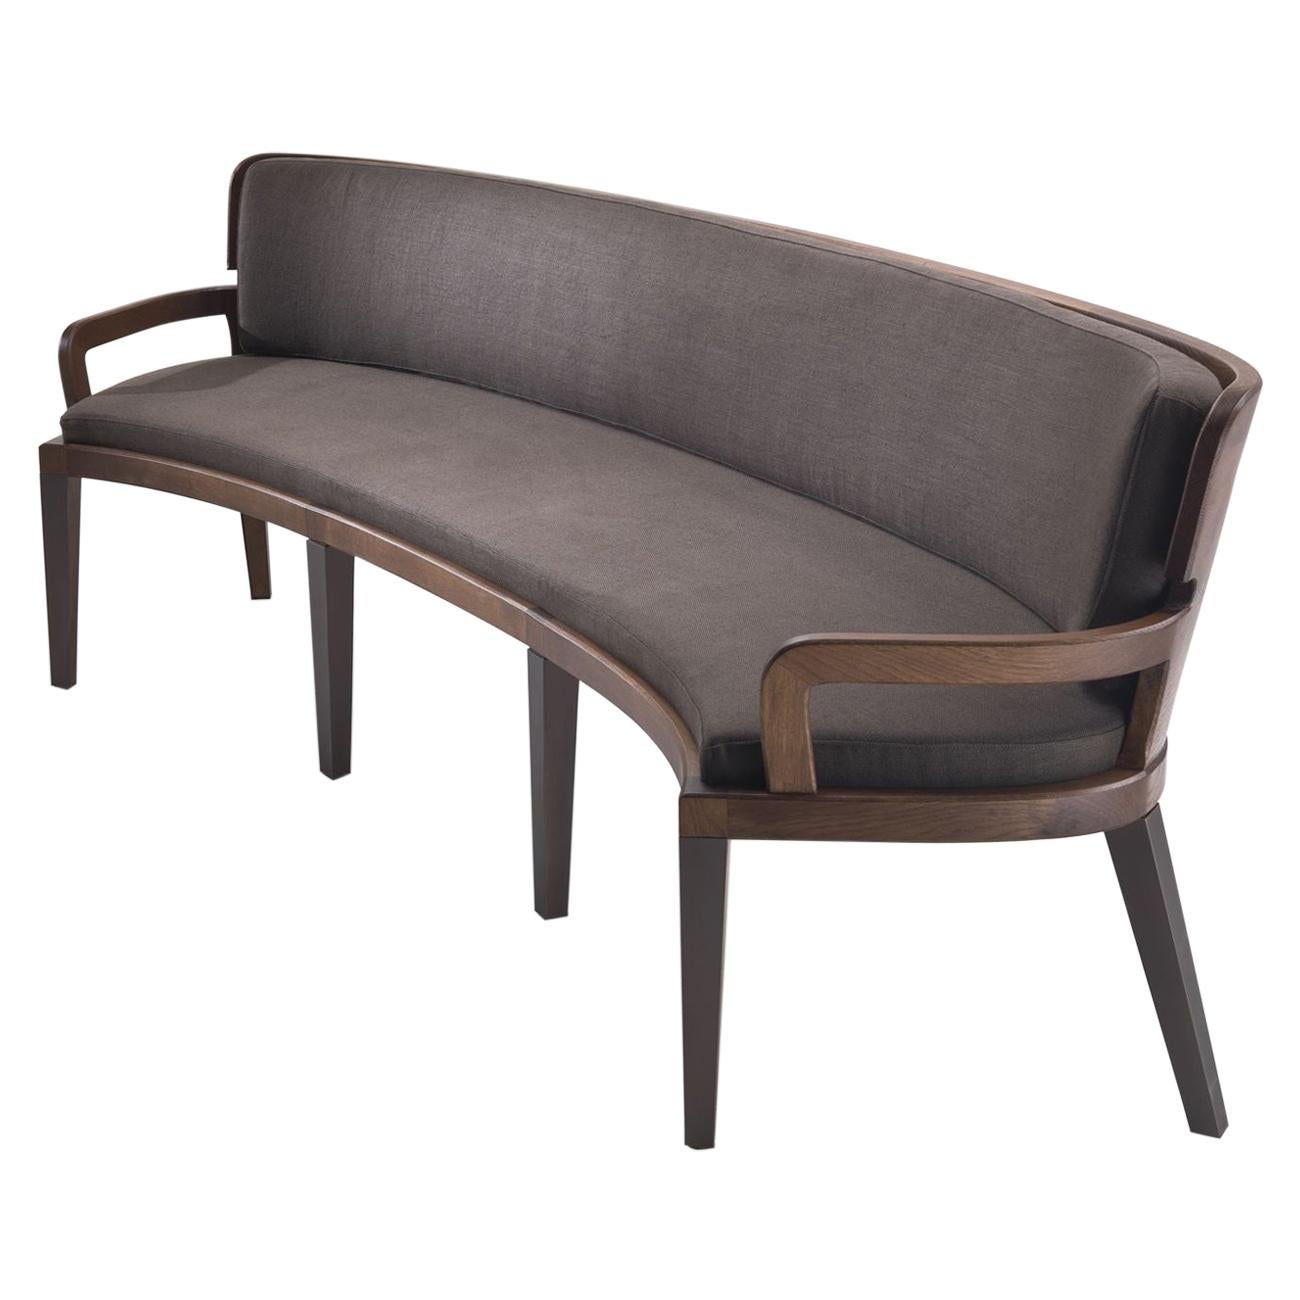 BULLE Round Curved Bench in Solid Oak and Metal Details on Legs For Sale